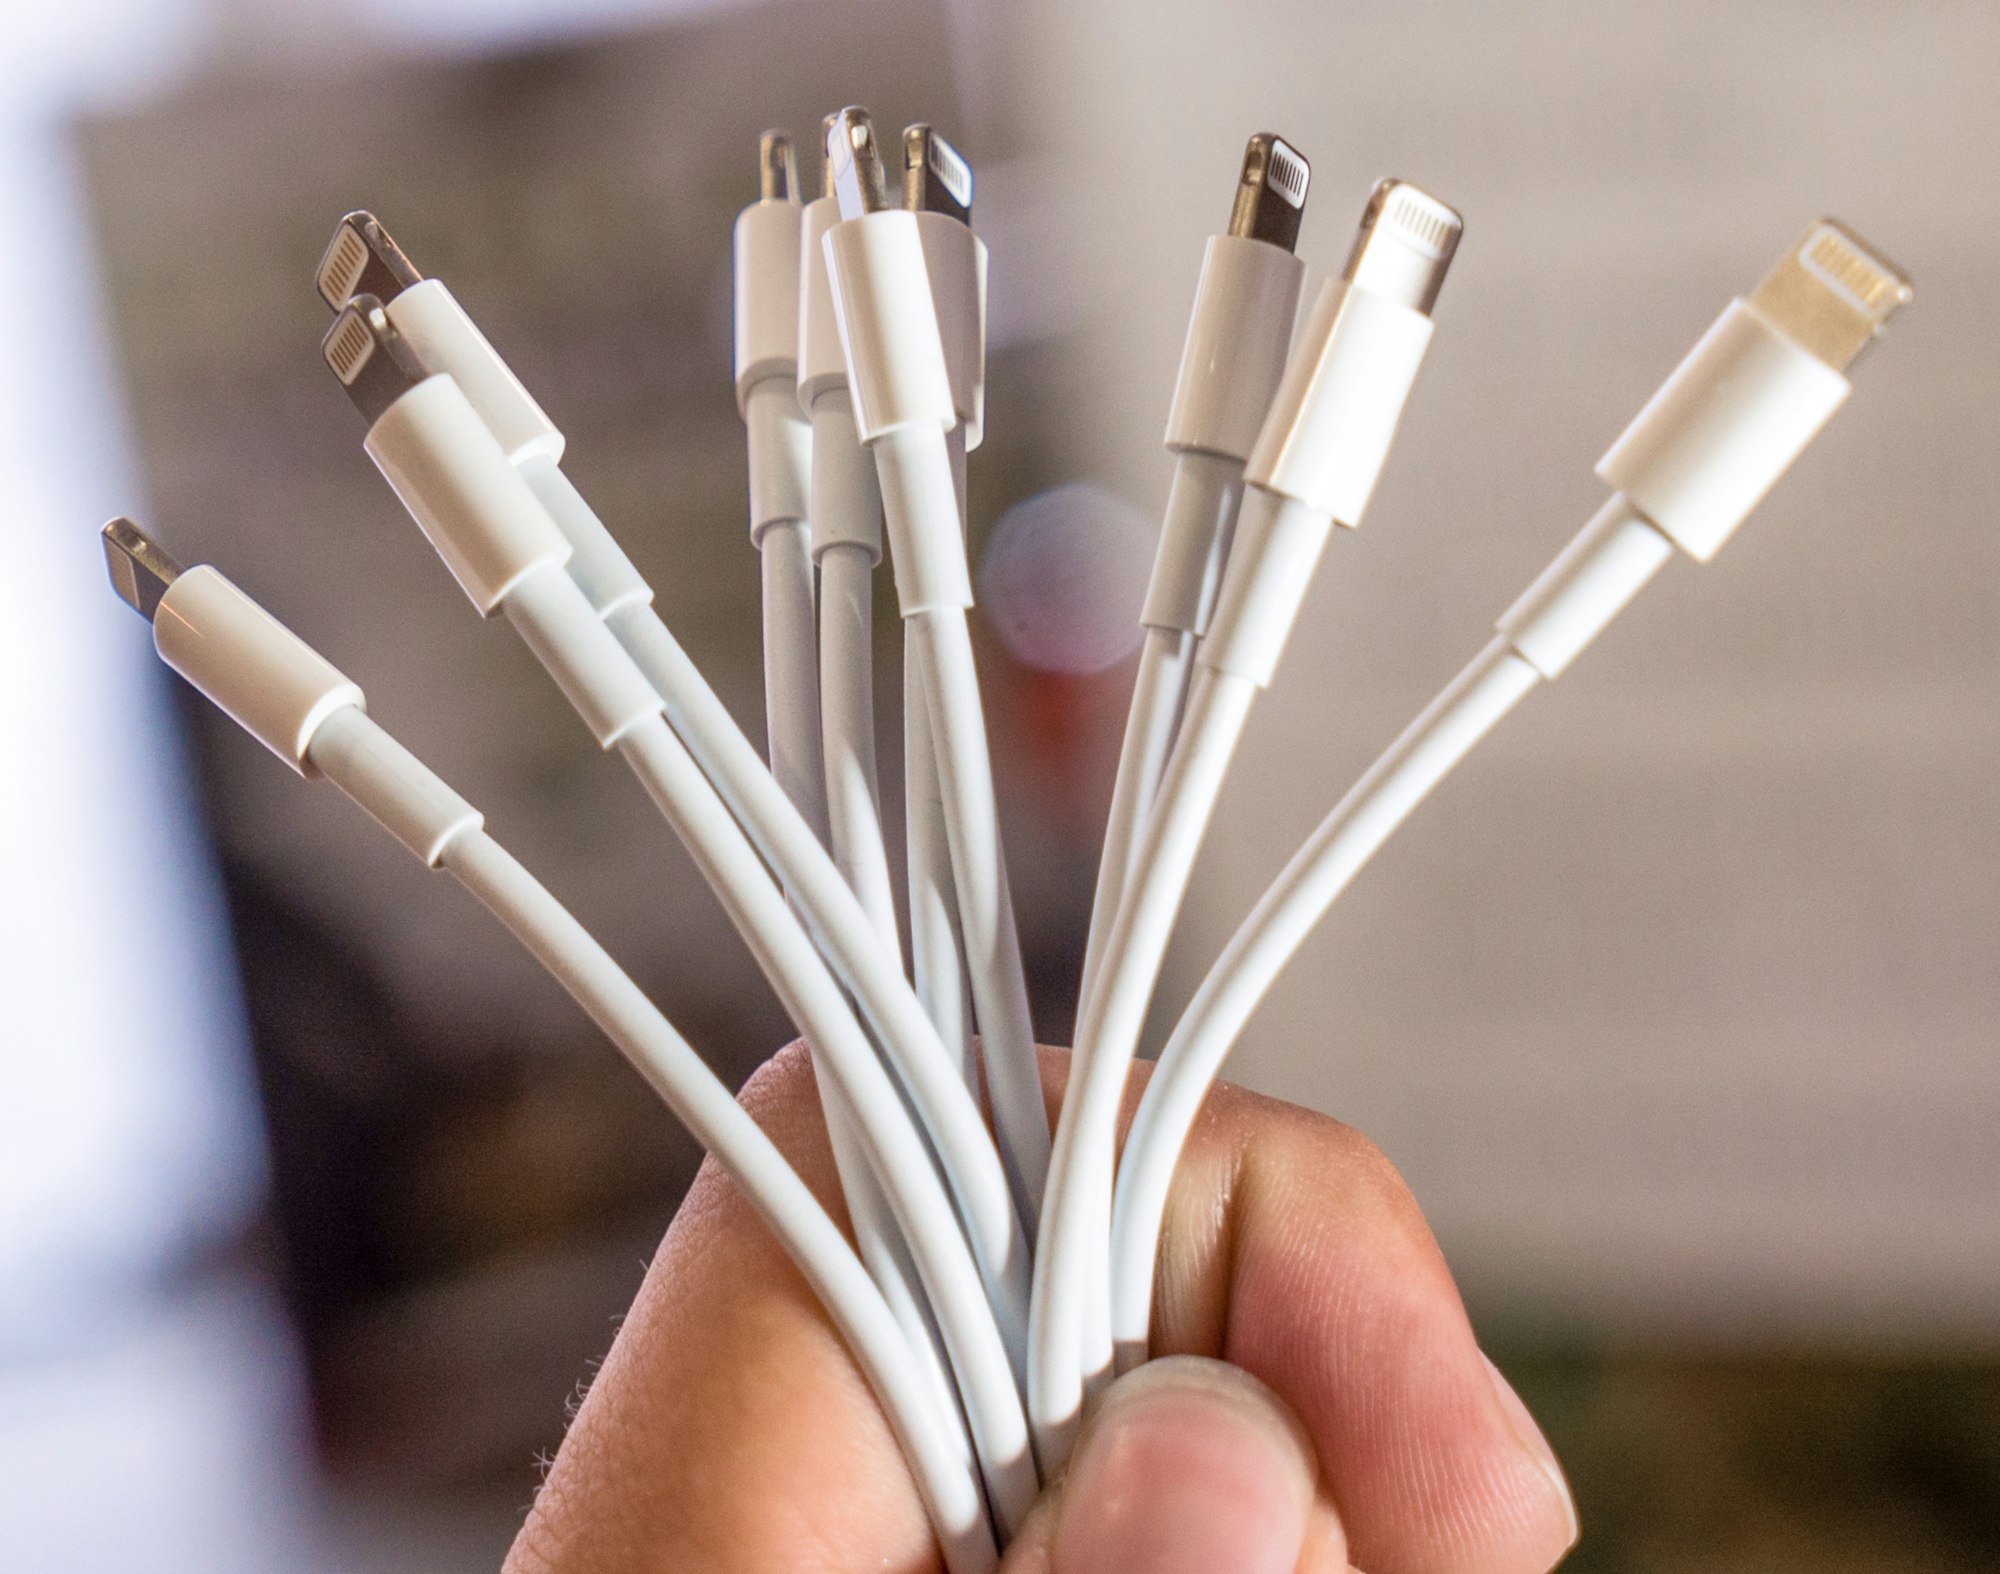 Lightning USB cables! A whole bunch of those! They are used to transfer data and charge iPhones.